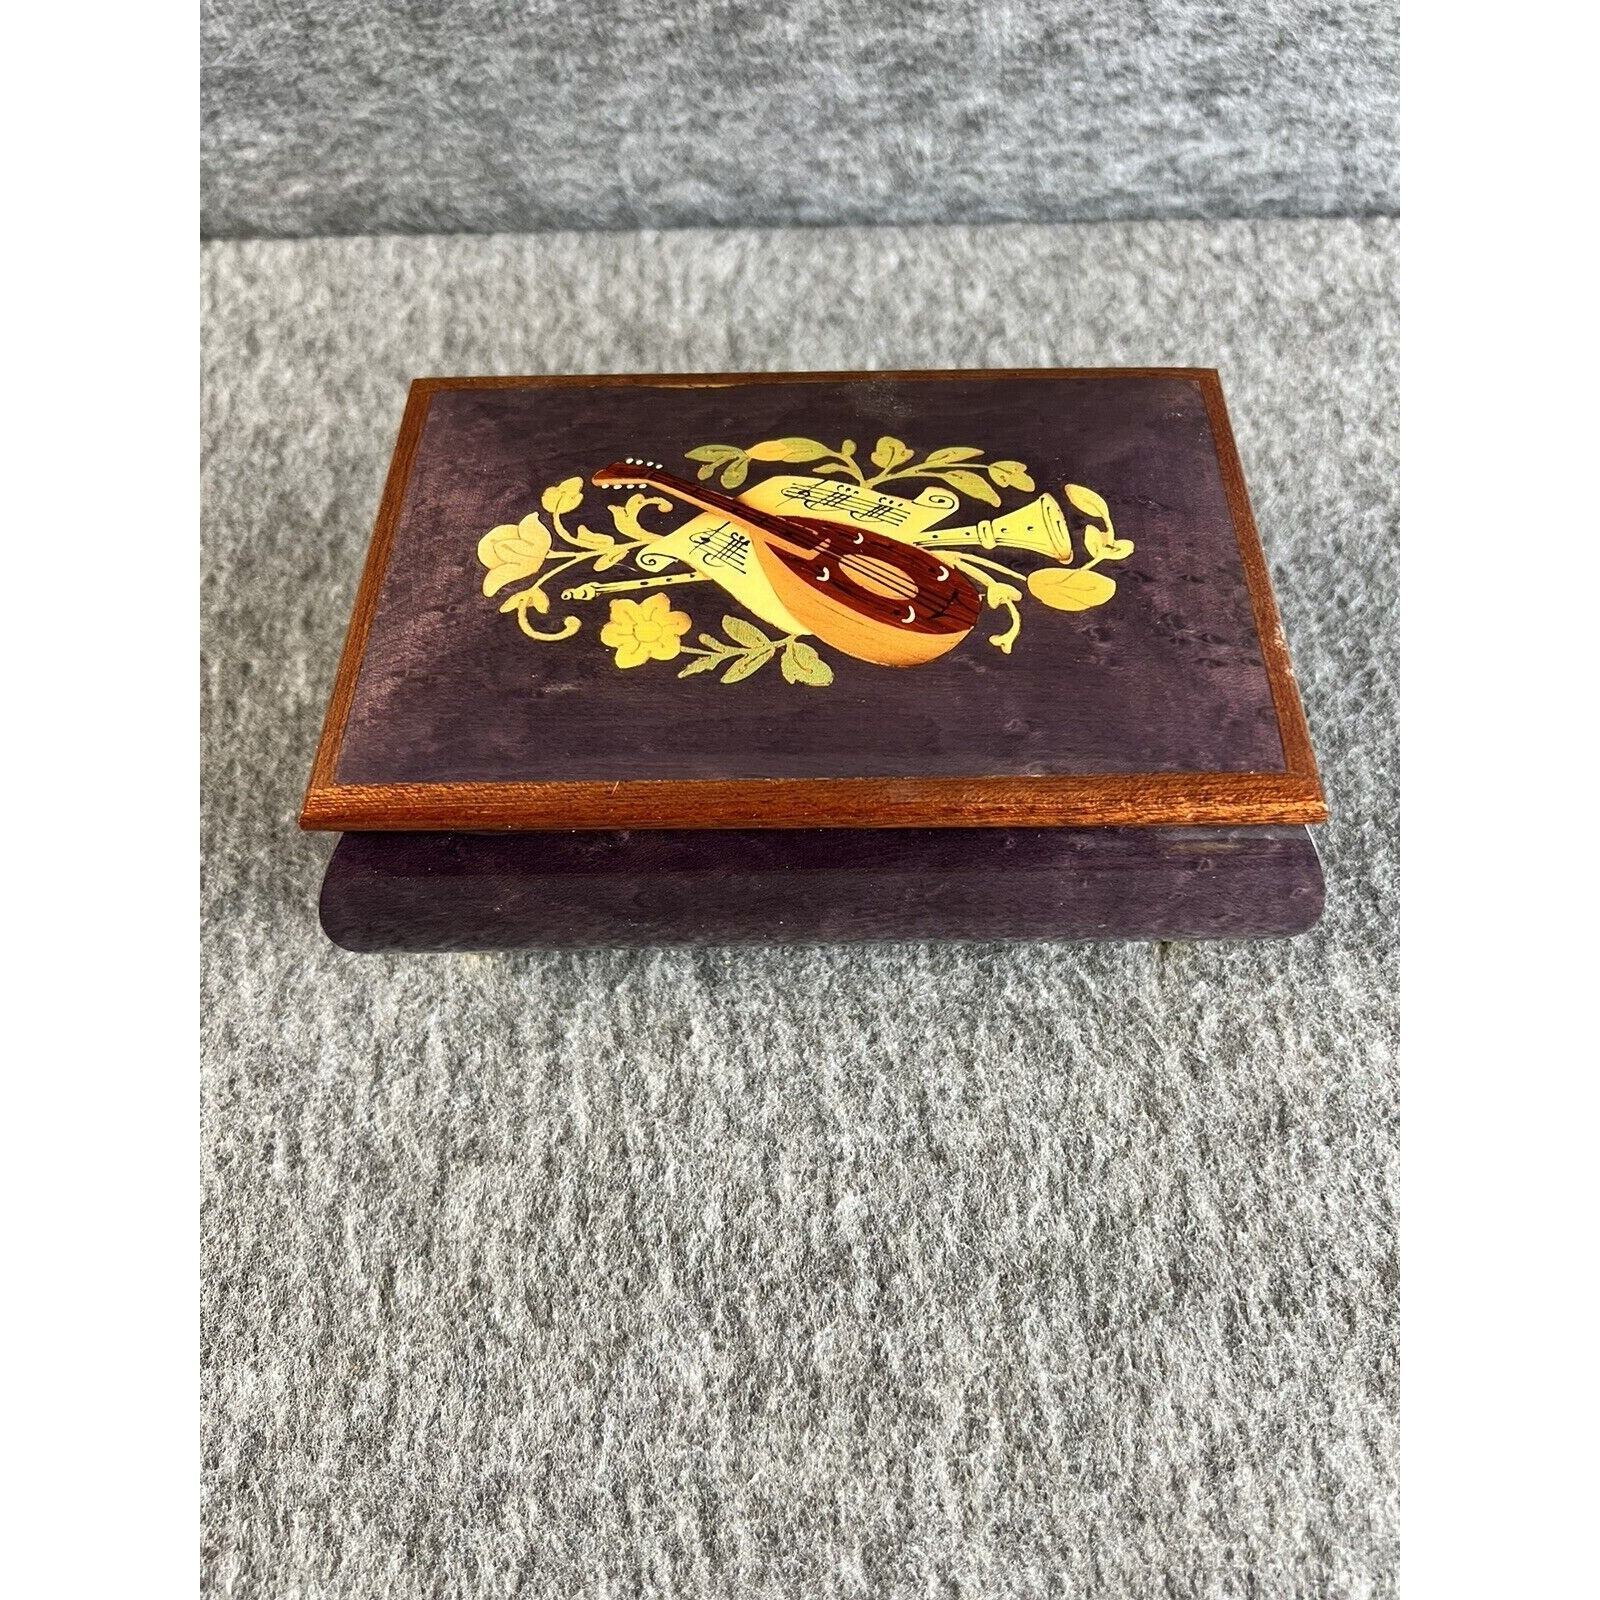 NEW Music Jewelry Box Vintage Italian Wood Inlay Footed with Musical Instrument